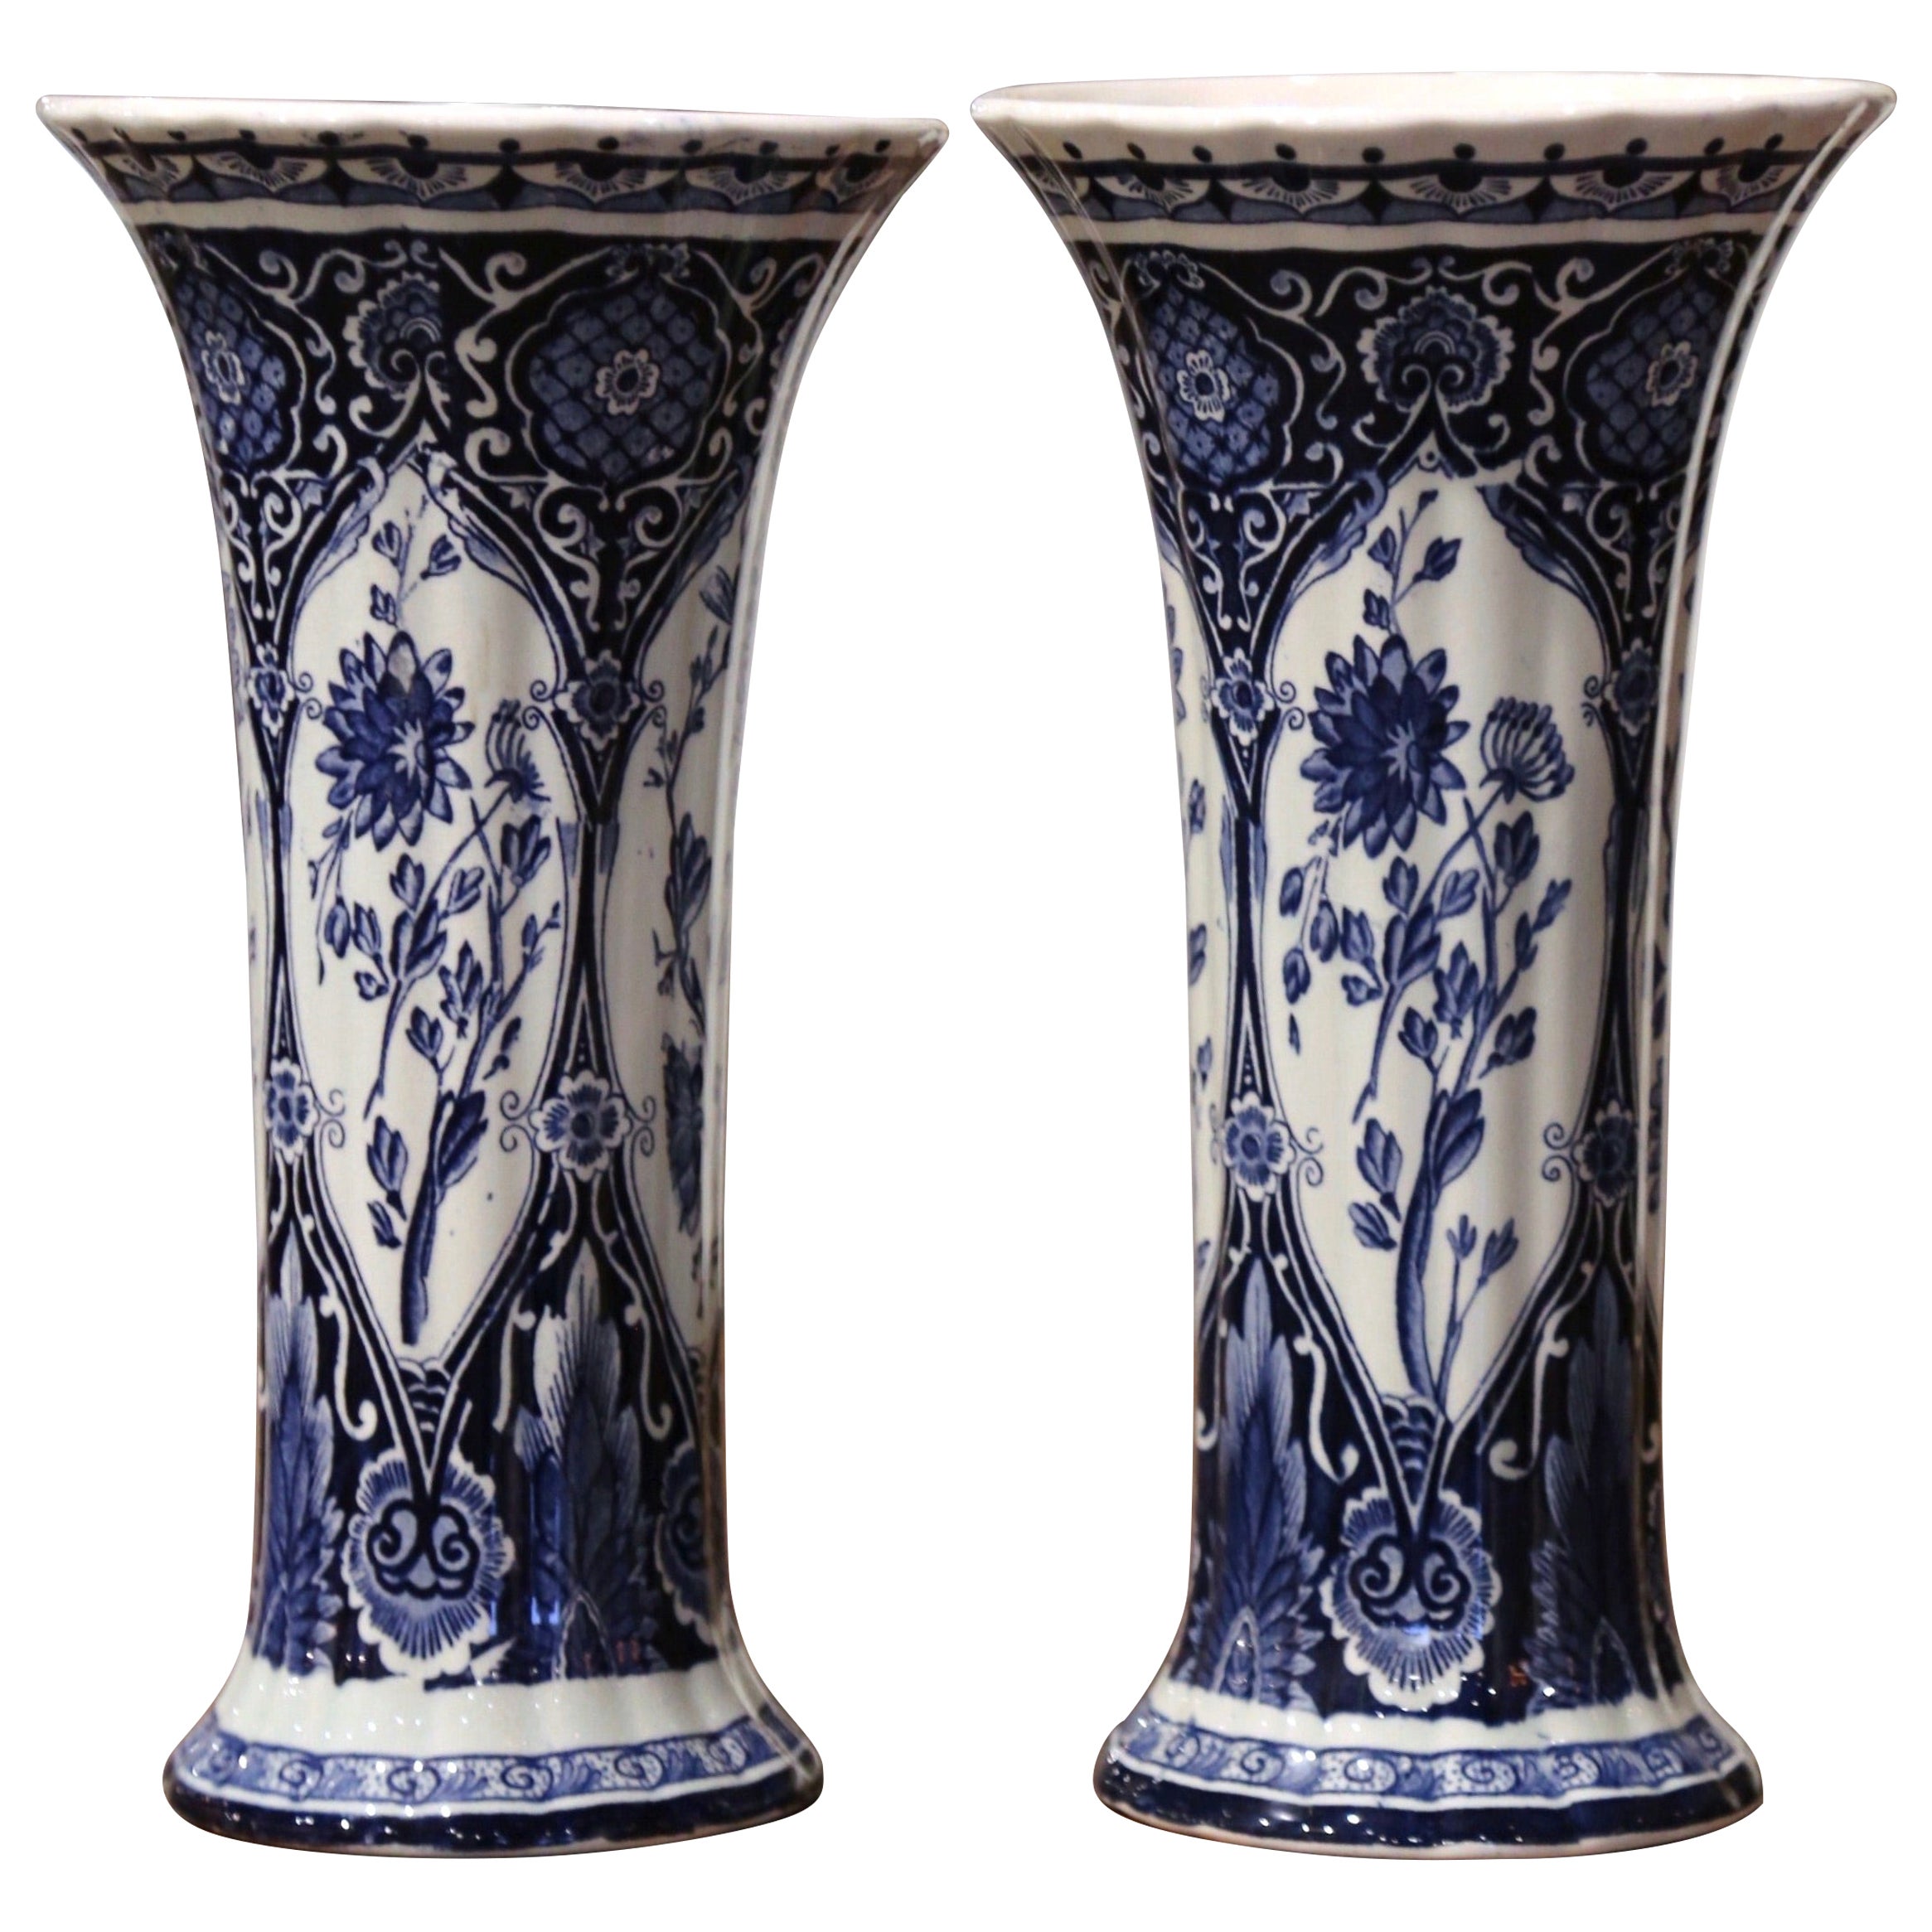 Pair of Early 20th Century Dutch Blue and White Trumpet Faience Delft Vases